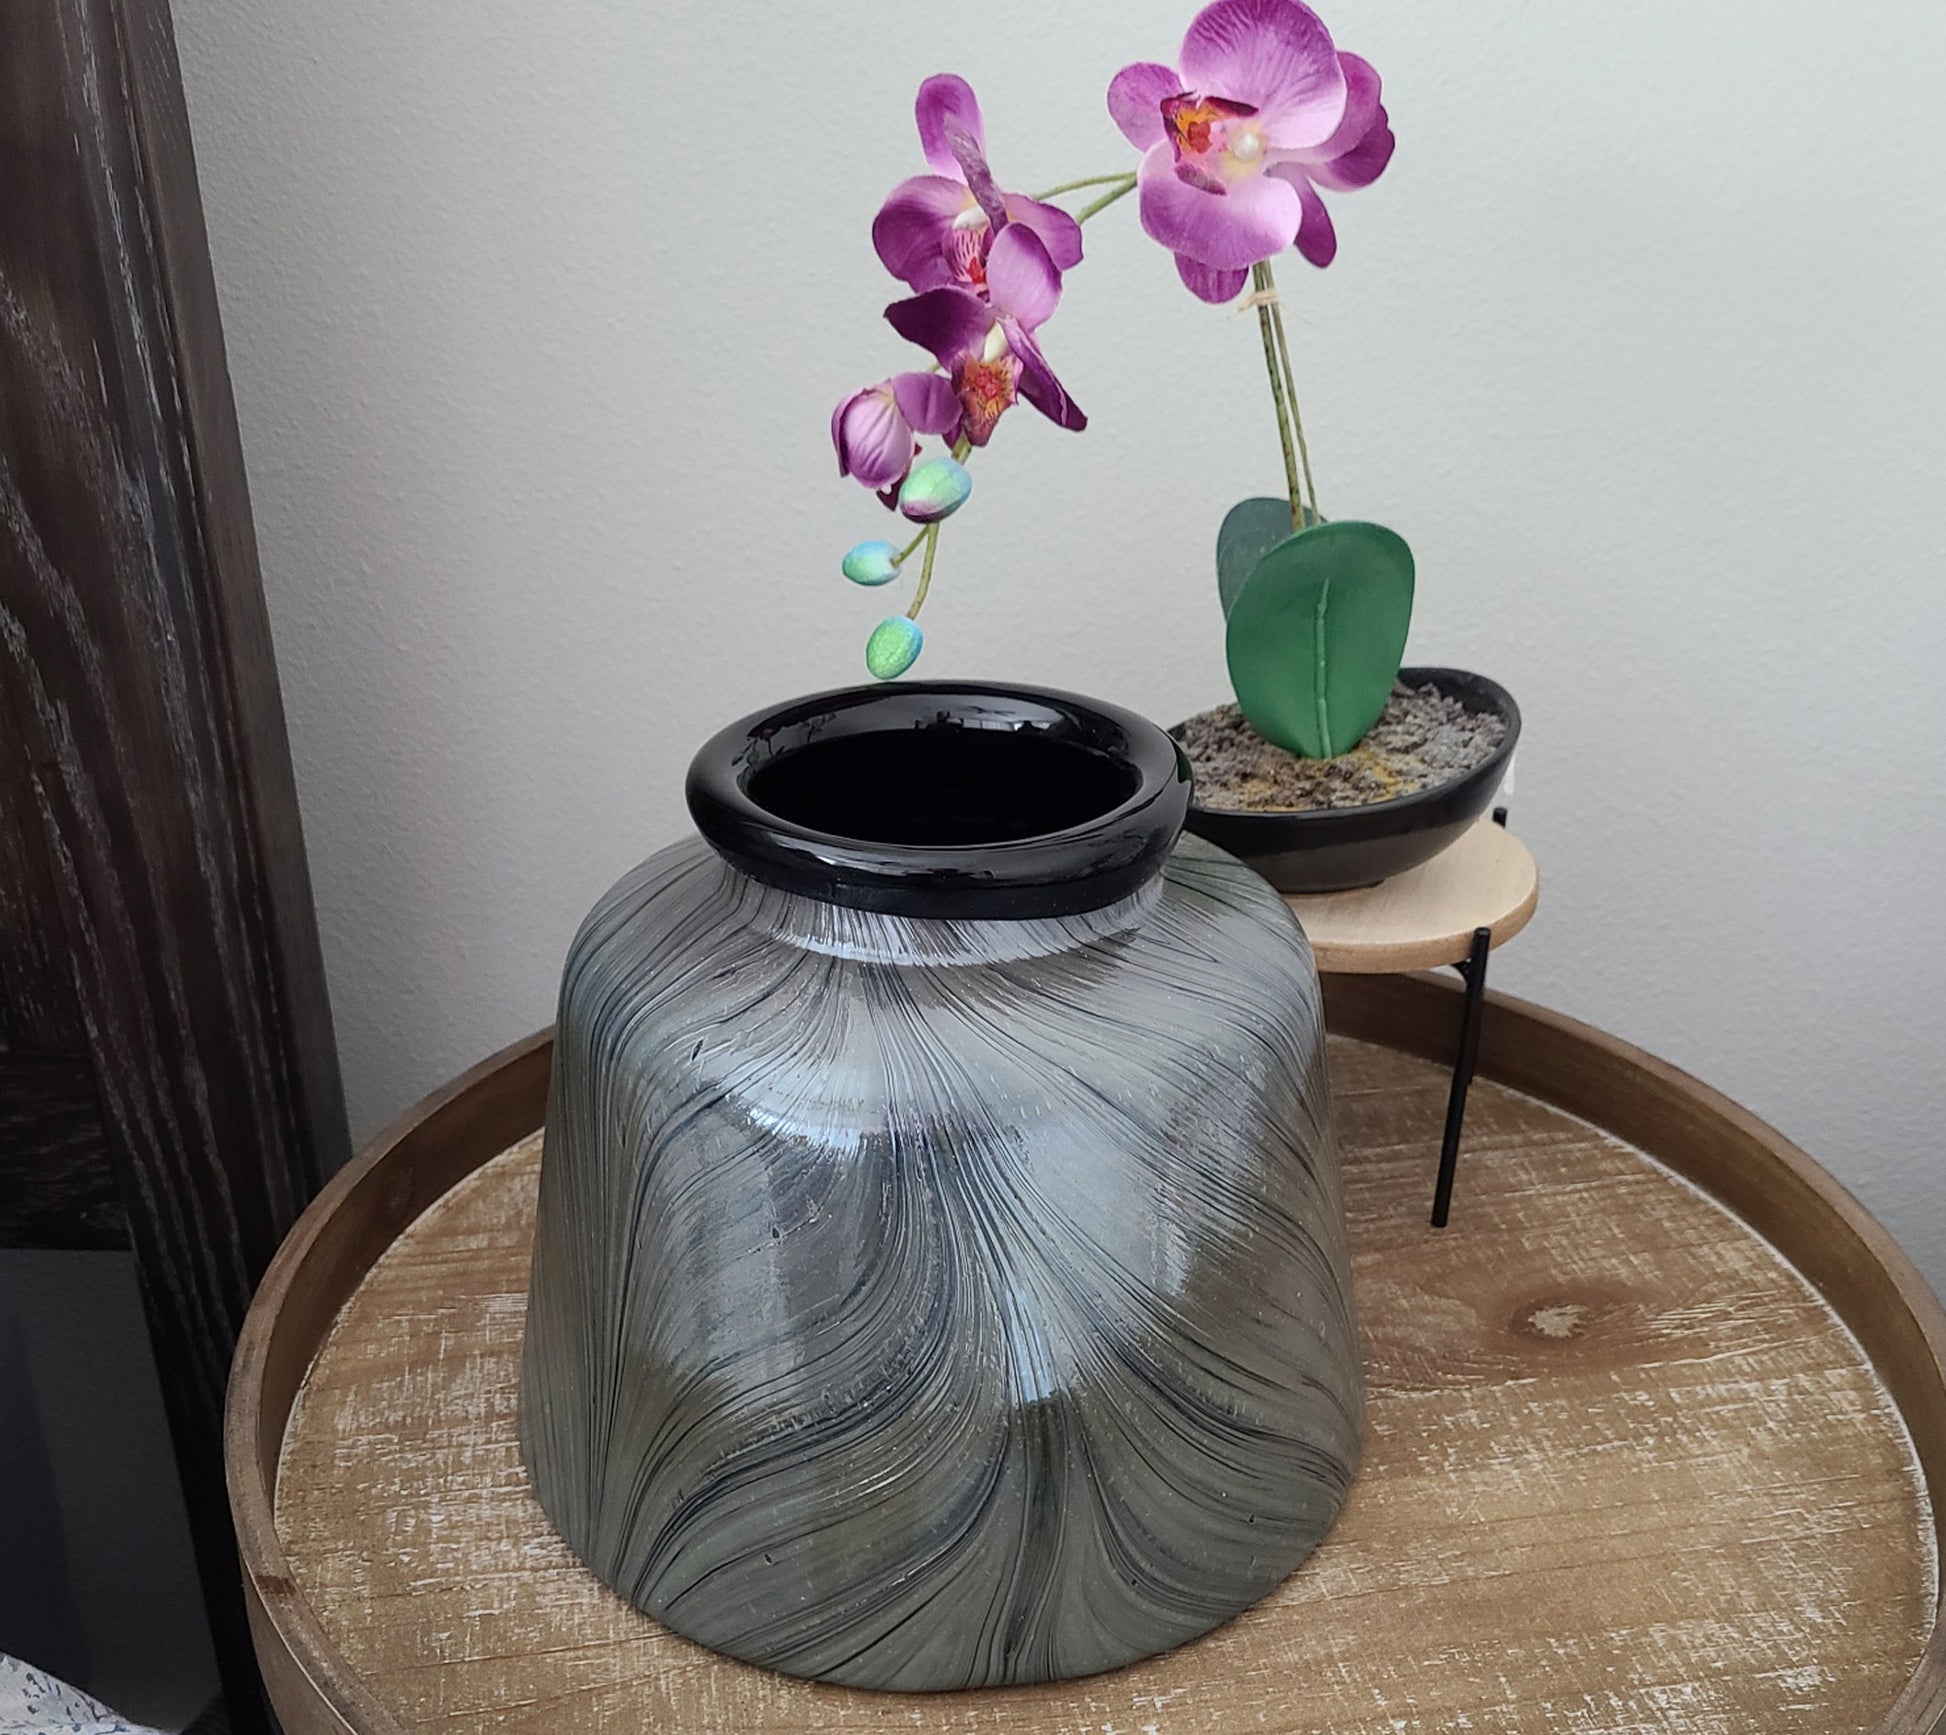 Black vase has silver metallic coating on the outside with lines that let the black show through.  Lines resemble a feather.  Has a reflective  quality to it. Cyan Design. Heavy vase.  Approximate size: 8 inches tall, 7.5 inches wide. Weighs 6.5 lbs.  